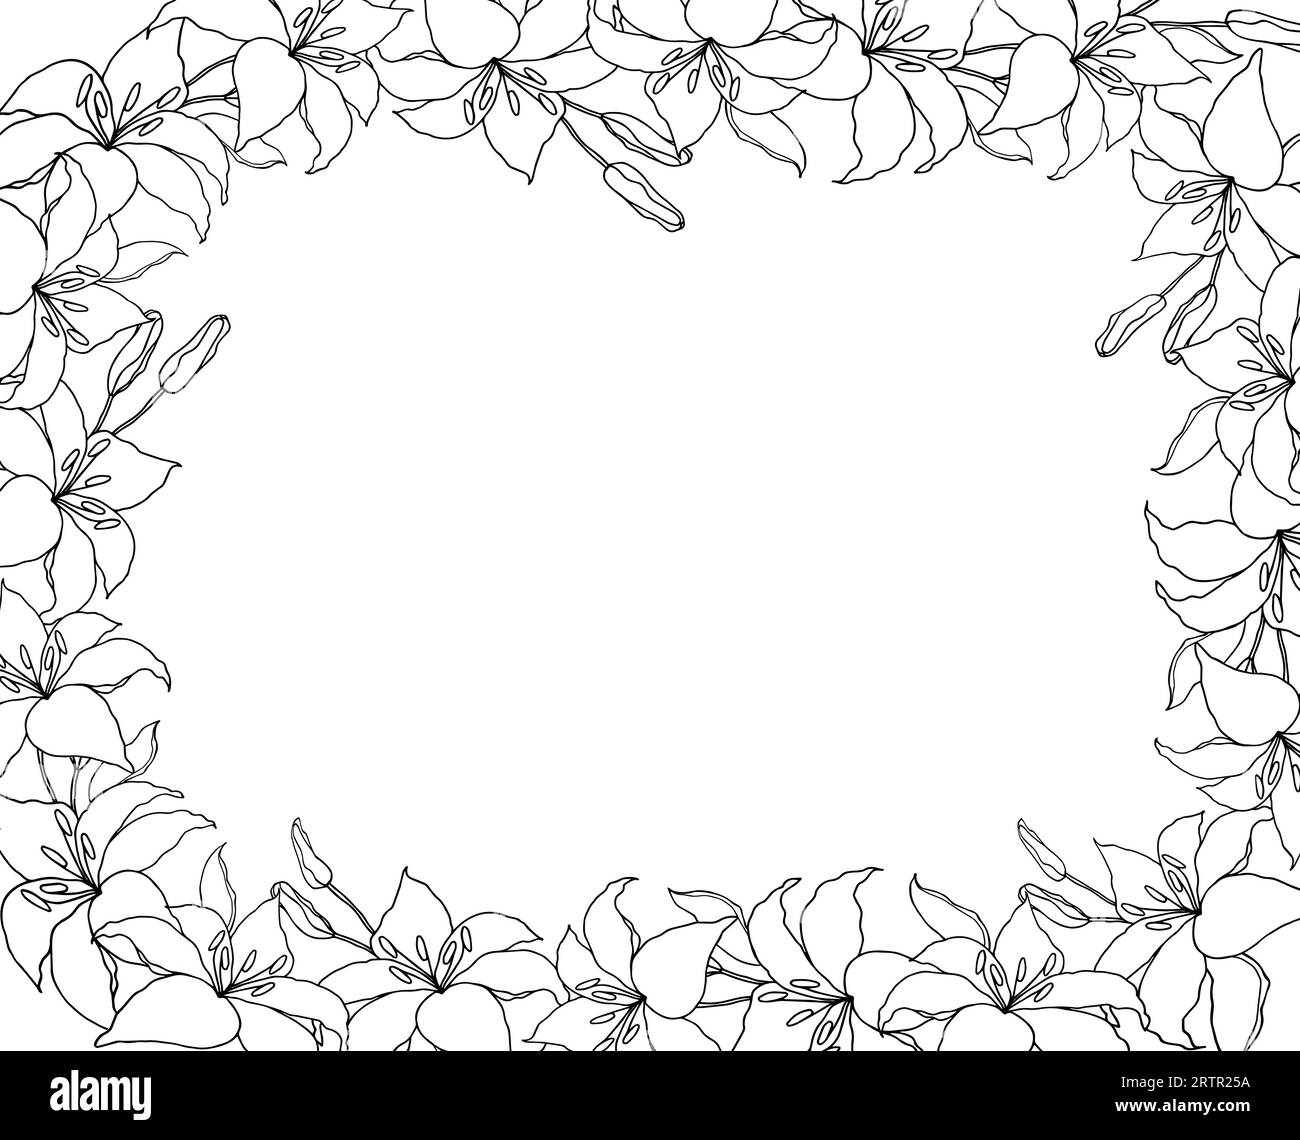 Lillie's line art flower background for wedding card or invitations. Hand drawn vector illustration template. Stock Vector